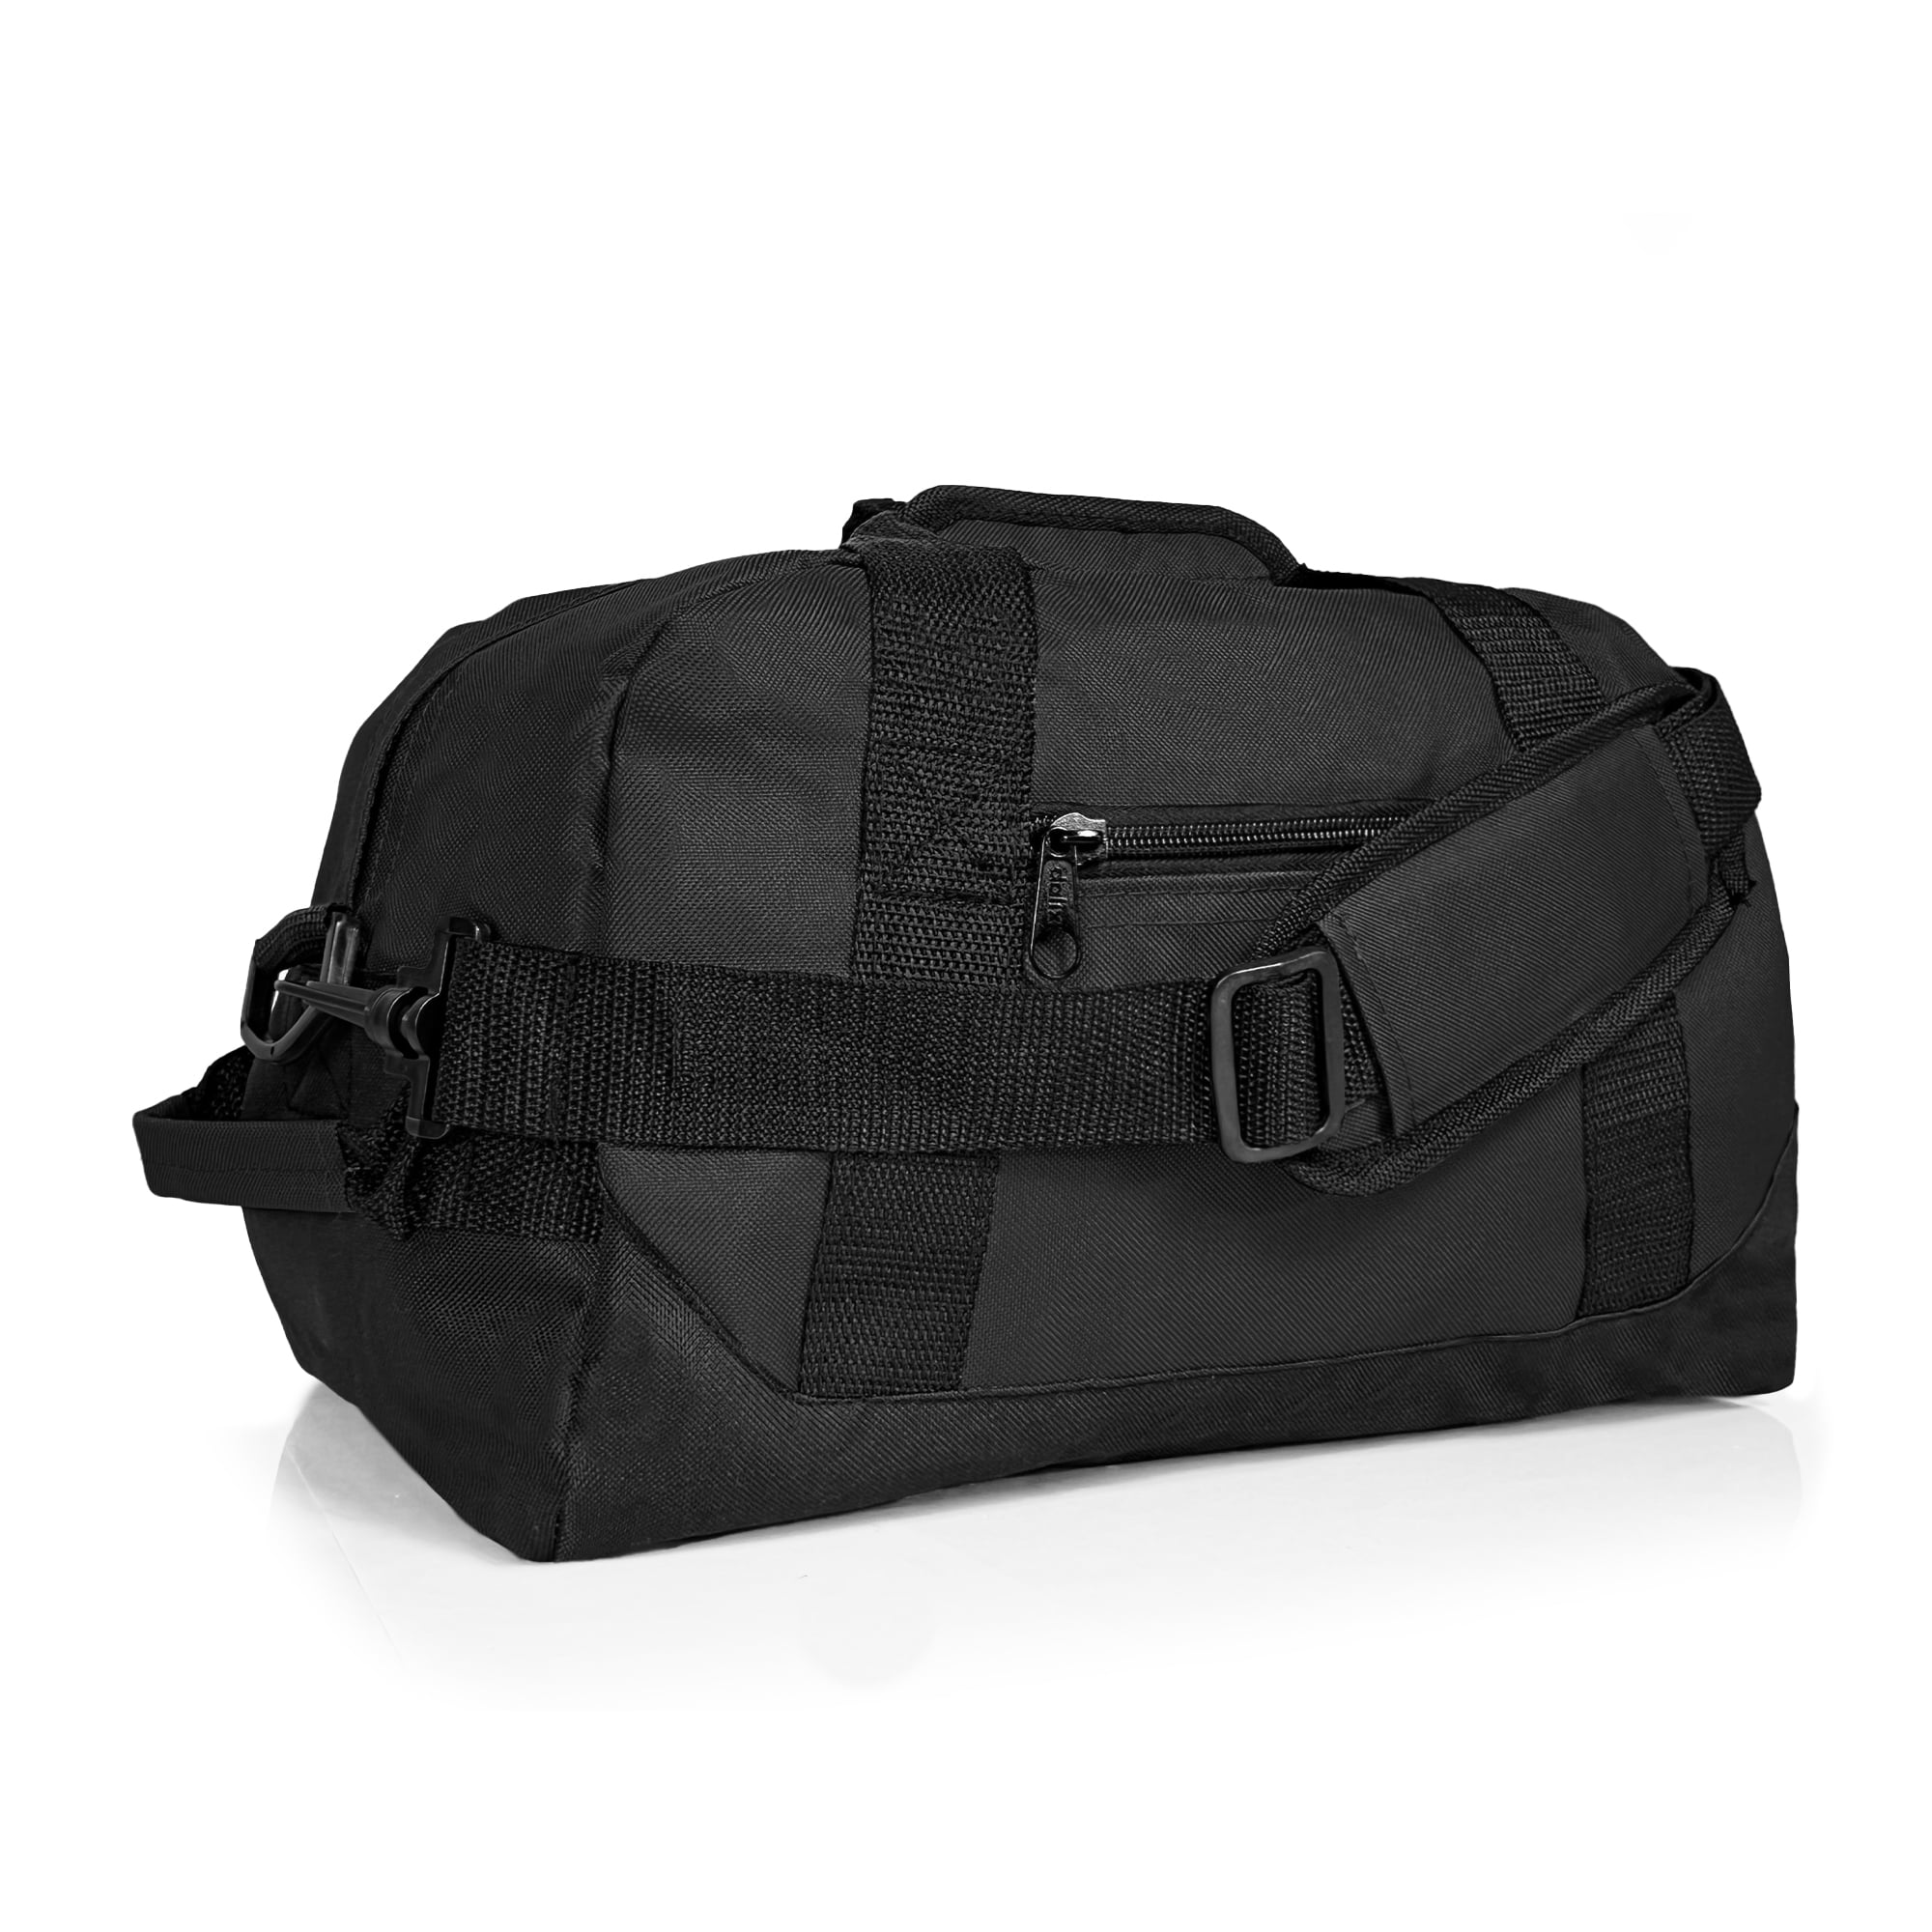 Small duffle bag with tonal Double G in black leather